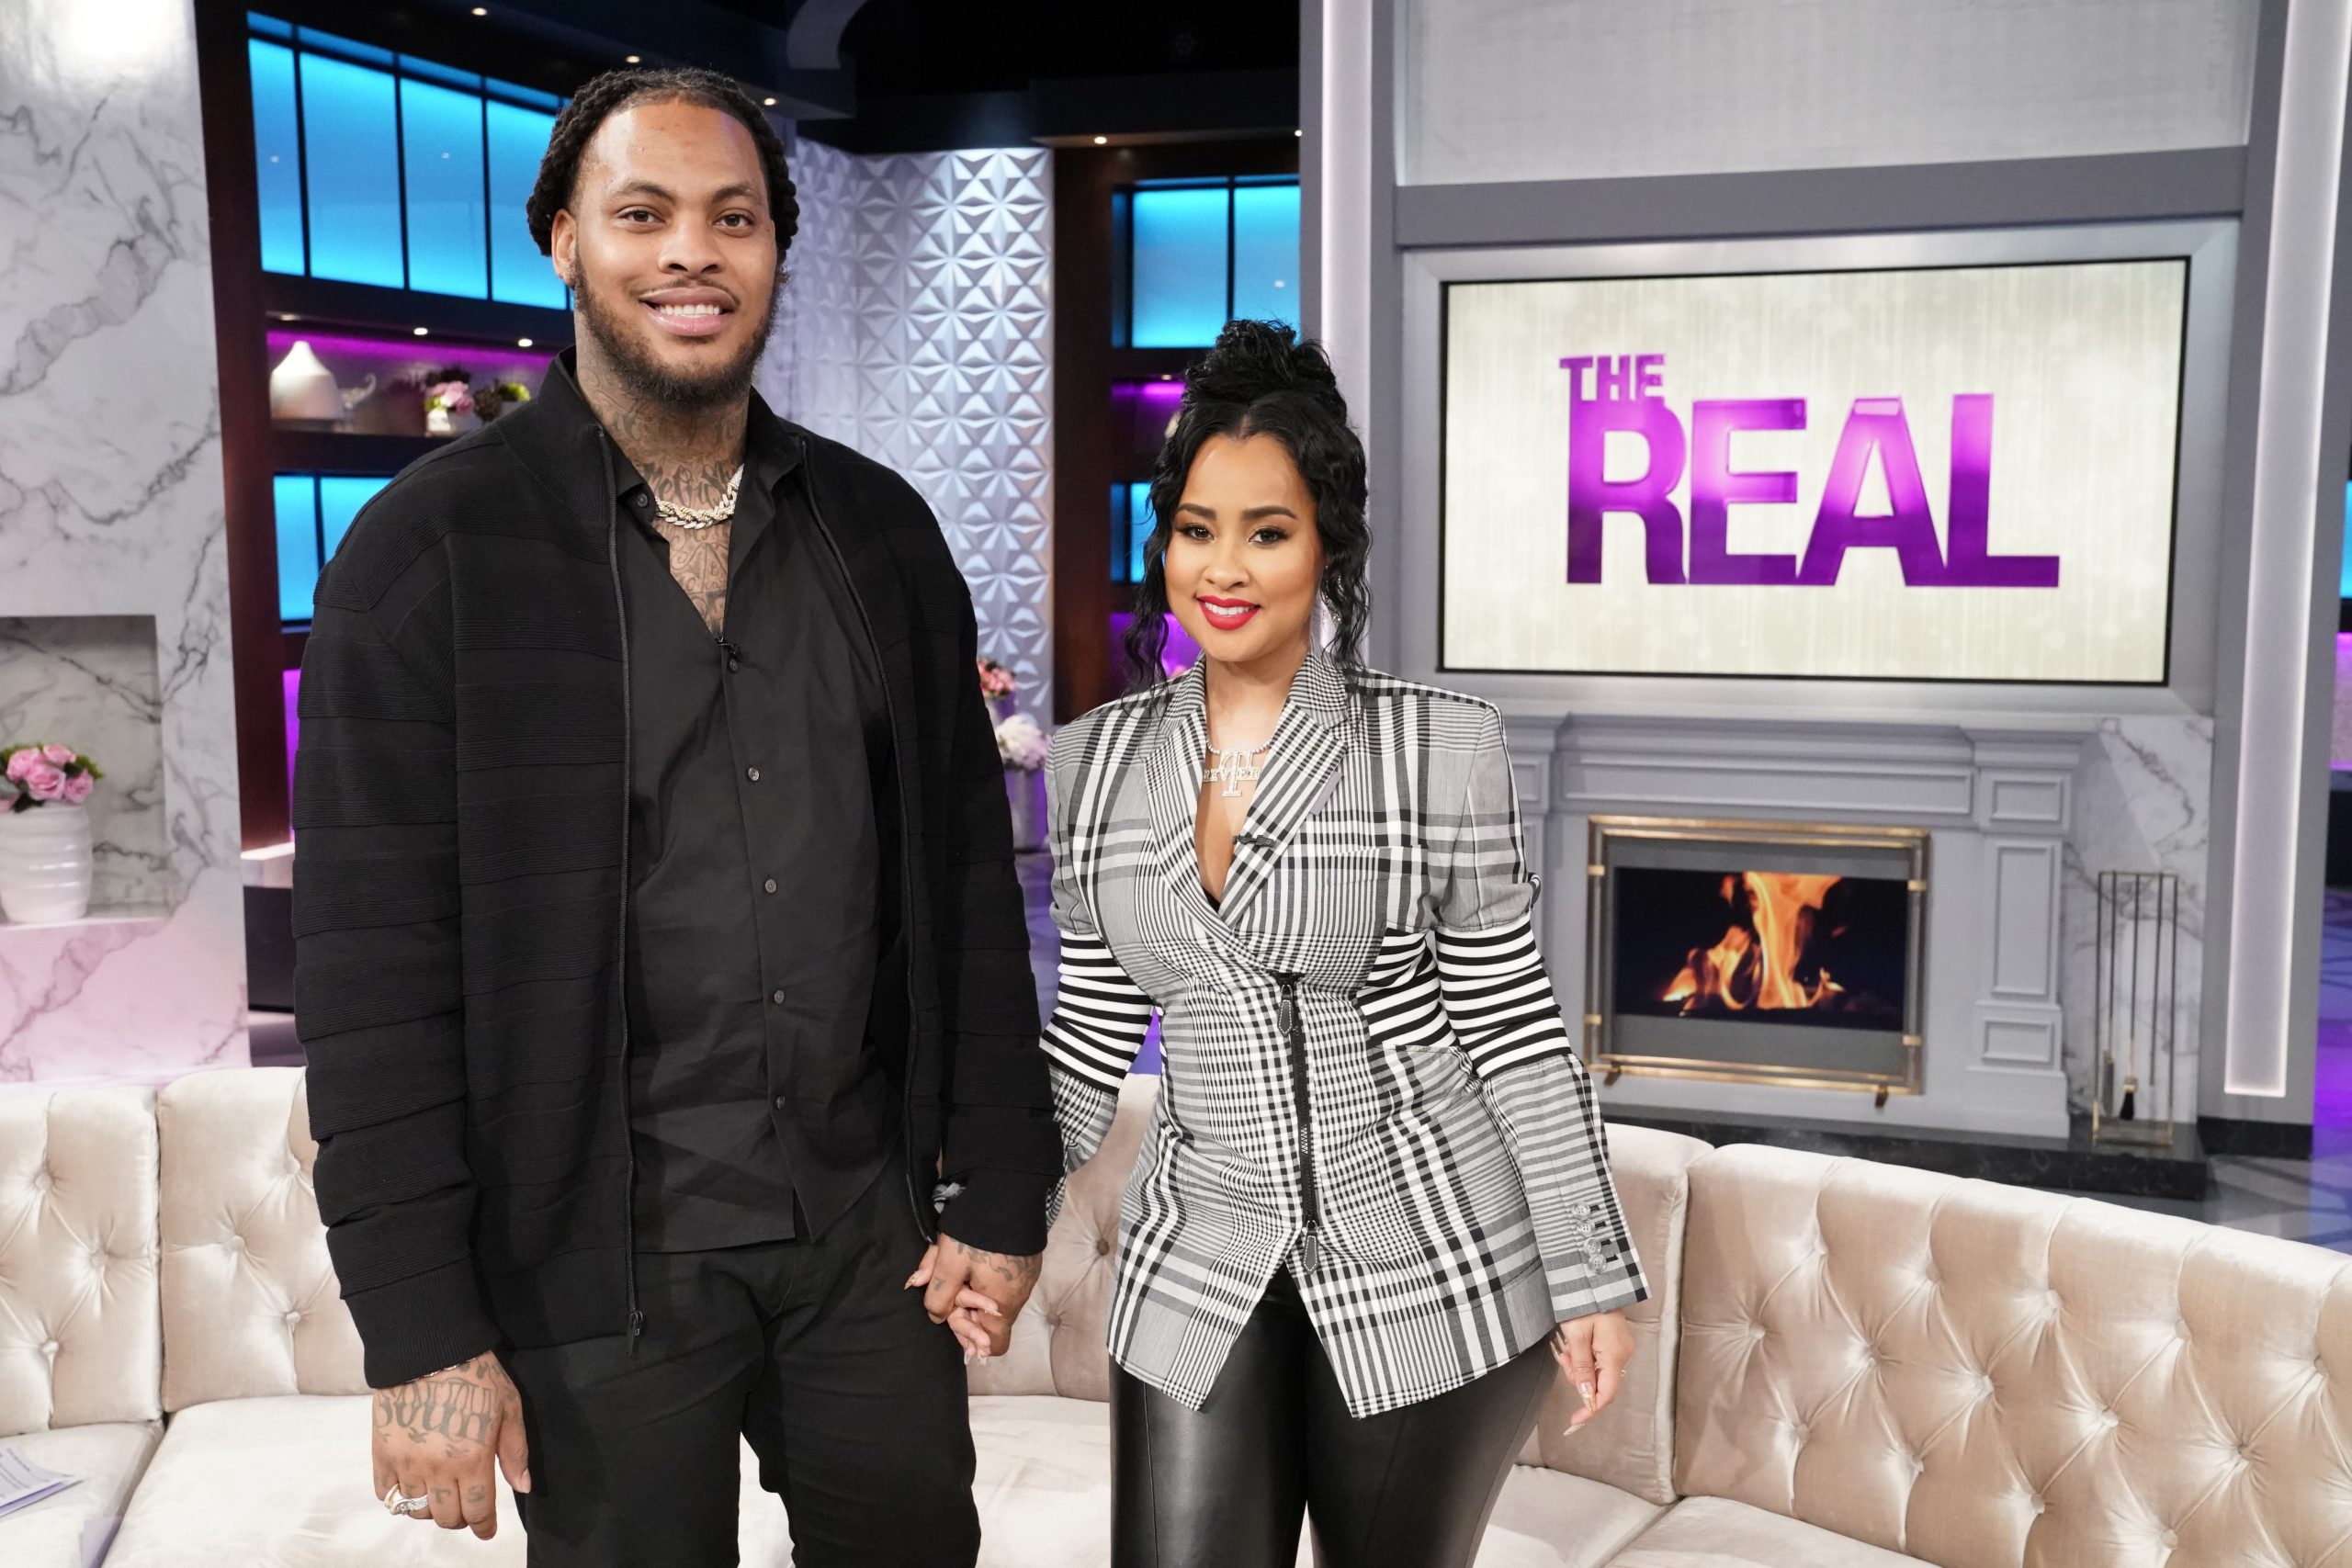 Wacka Flocka And Tammy Rivera Stop By The Real, Waka Wants To Be A Better Example For His Community